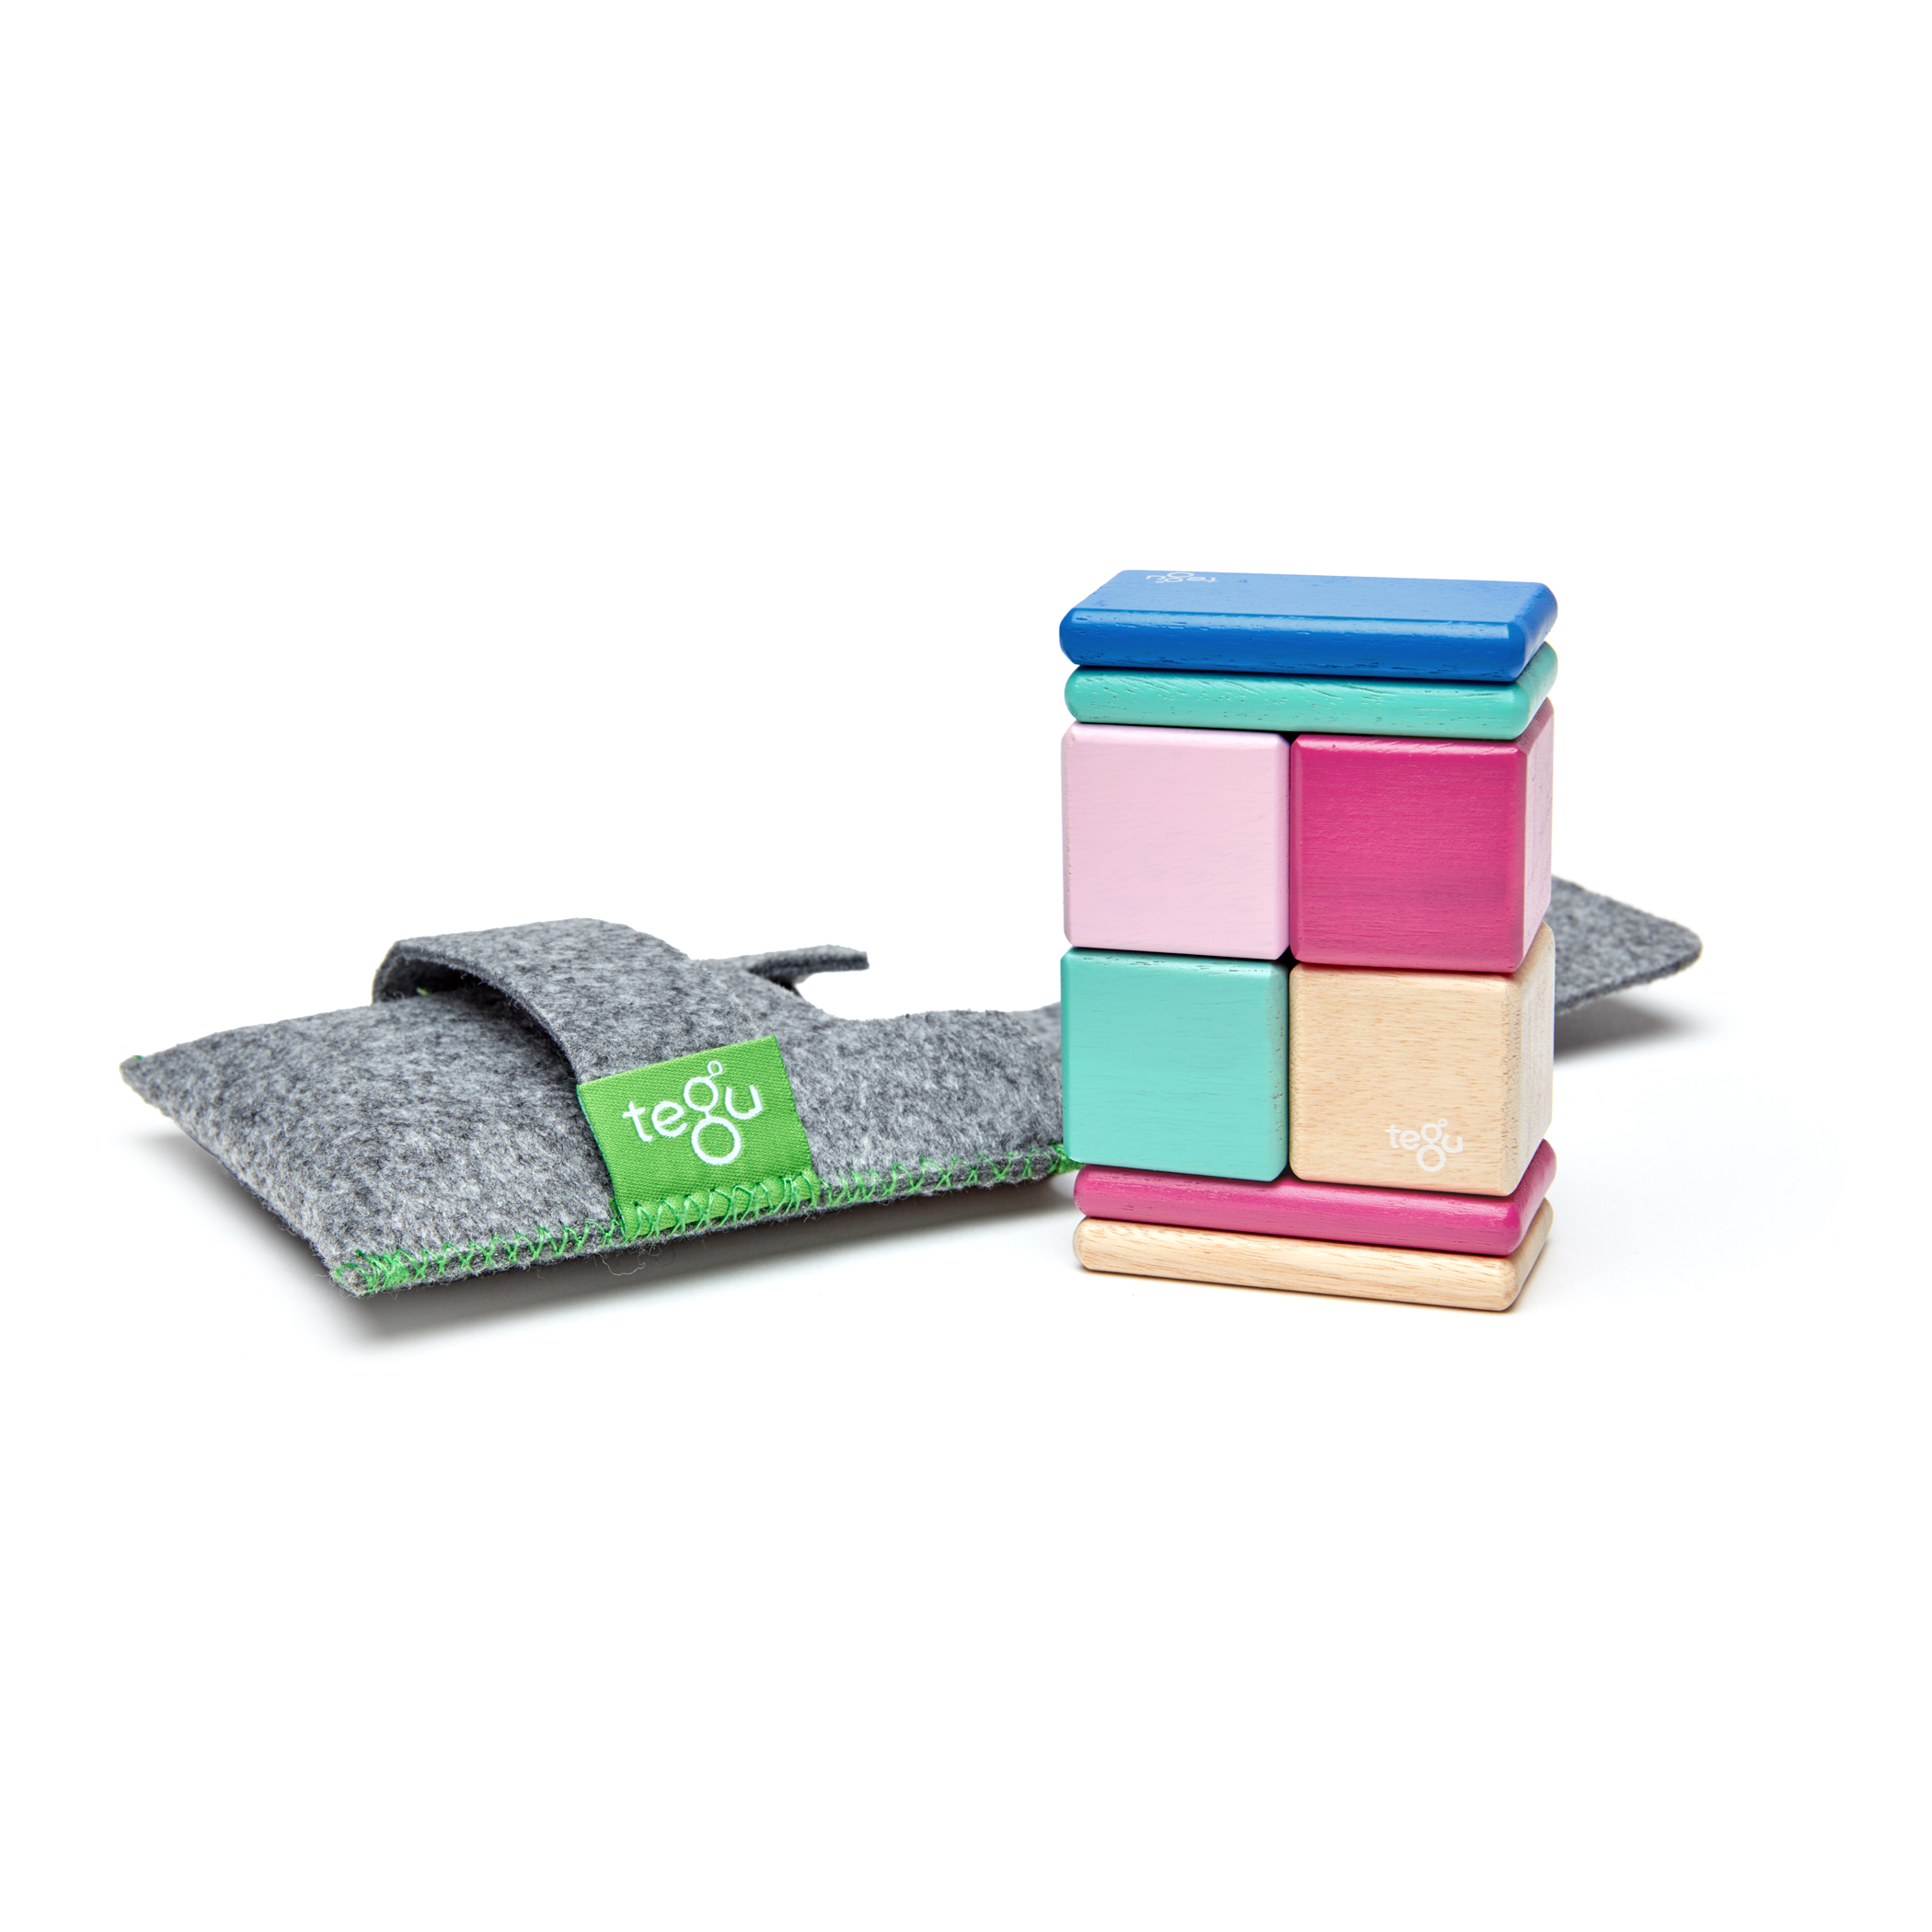 Tegu Magnetic Wooden Blocks, 8-Piece Pocket Pouch, Blossom